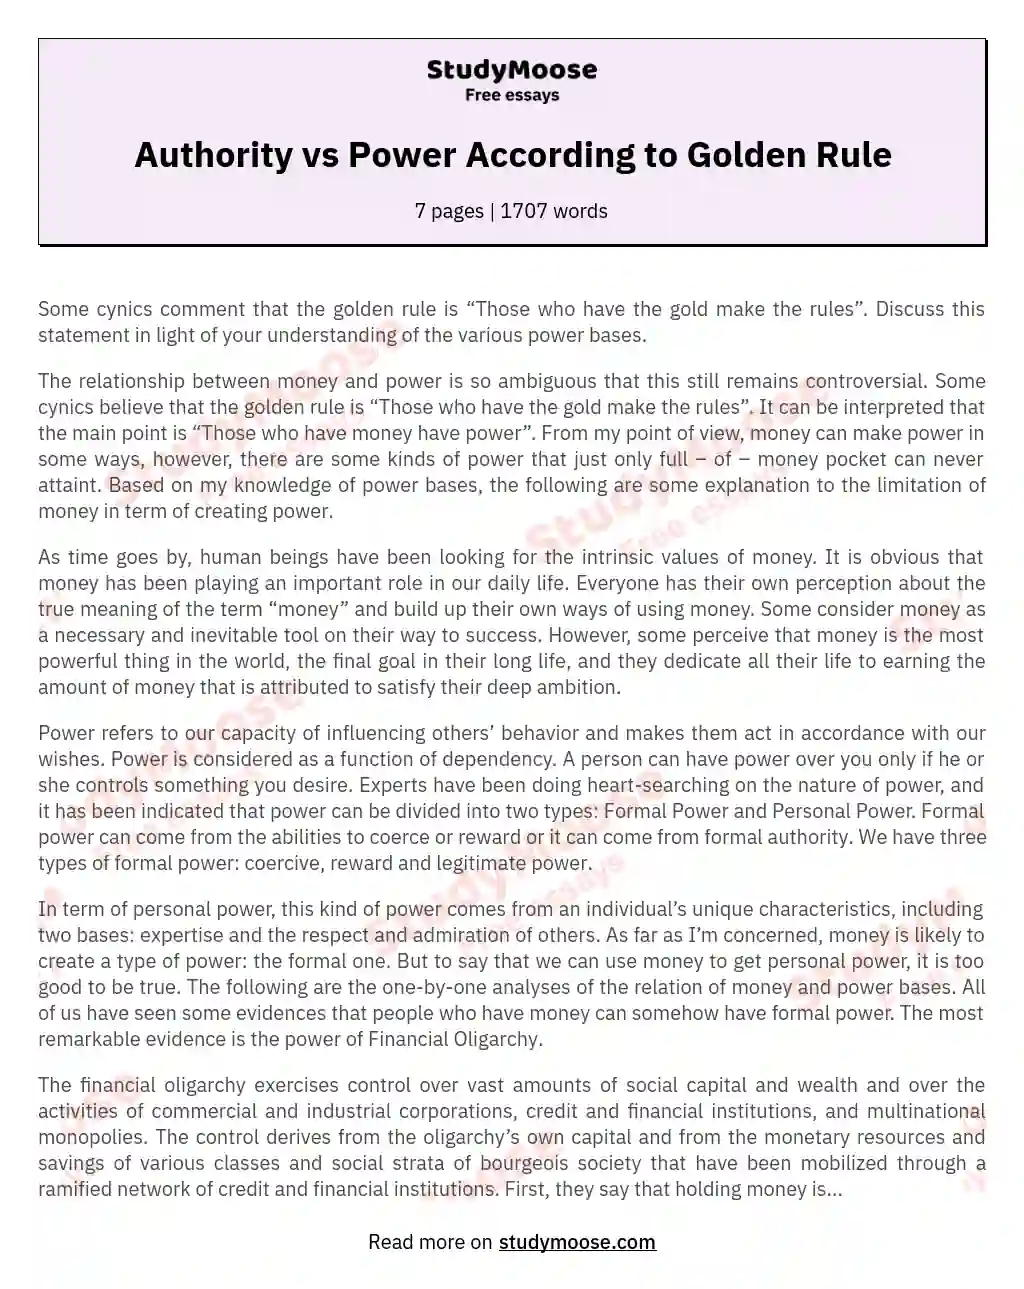 Authority vs Power According to Golden Rule essay